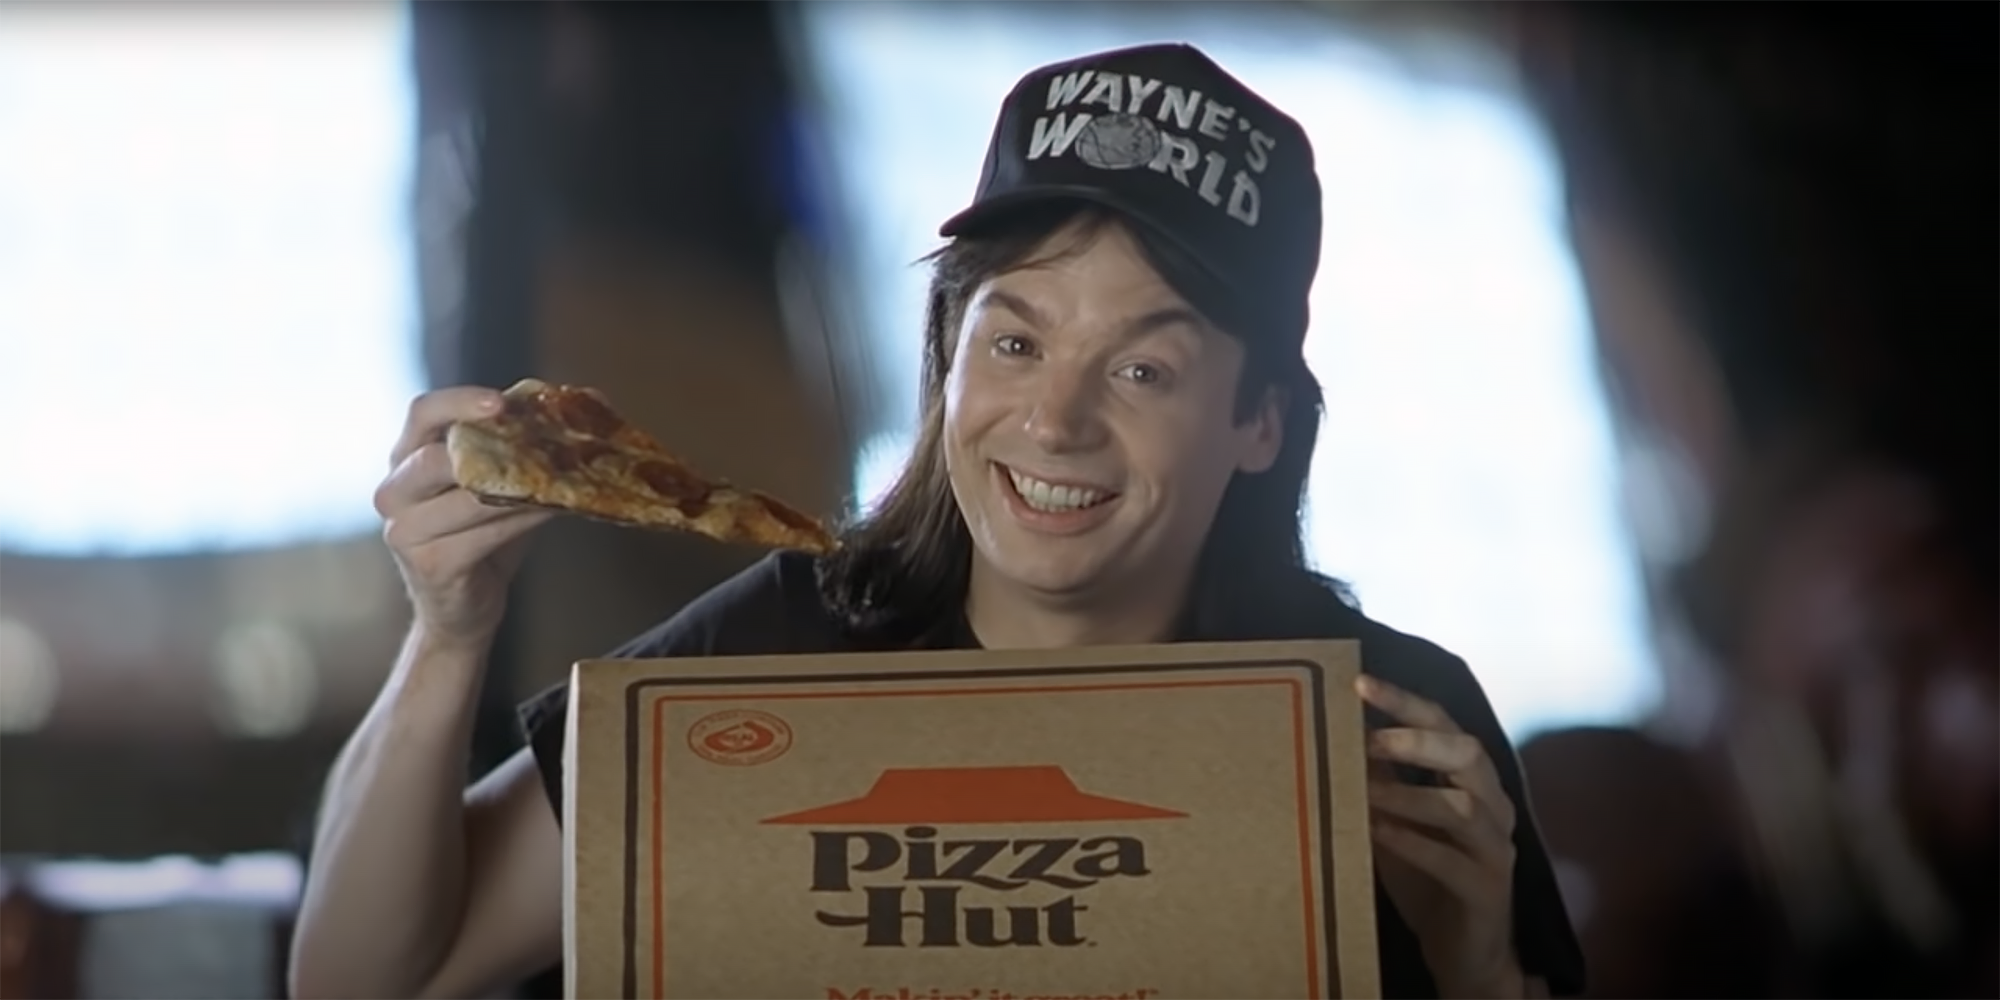 The use of fourth wall breaks in 'Wayne's World' is very meta